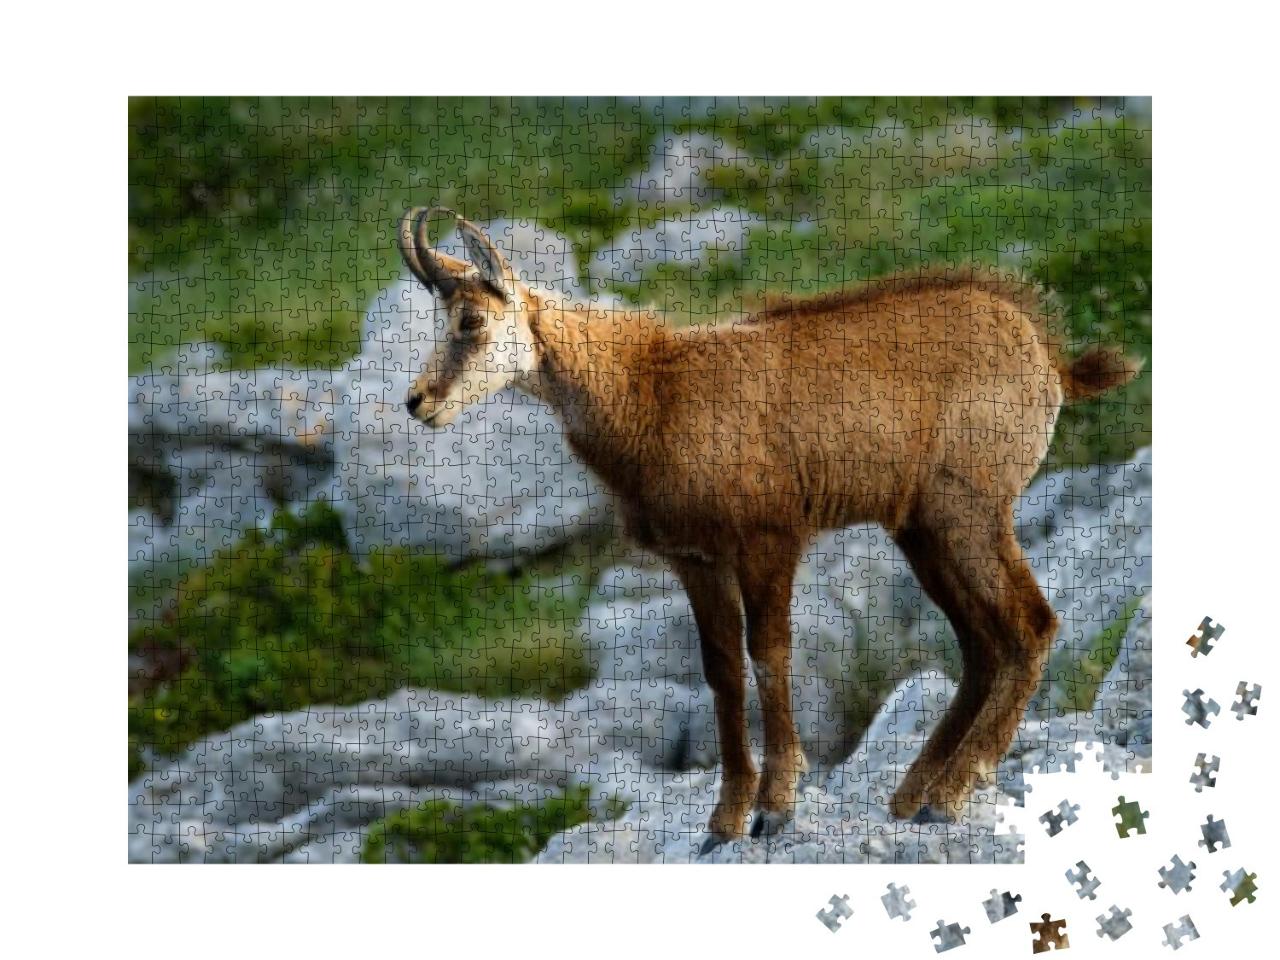 Chamois in Biokovo Nature Park, Croatia... Jigsaw Puzzle with 1000 pieces